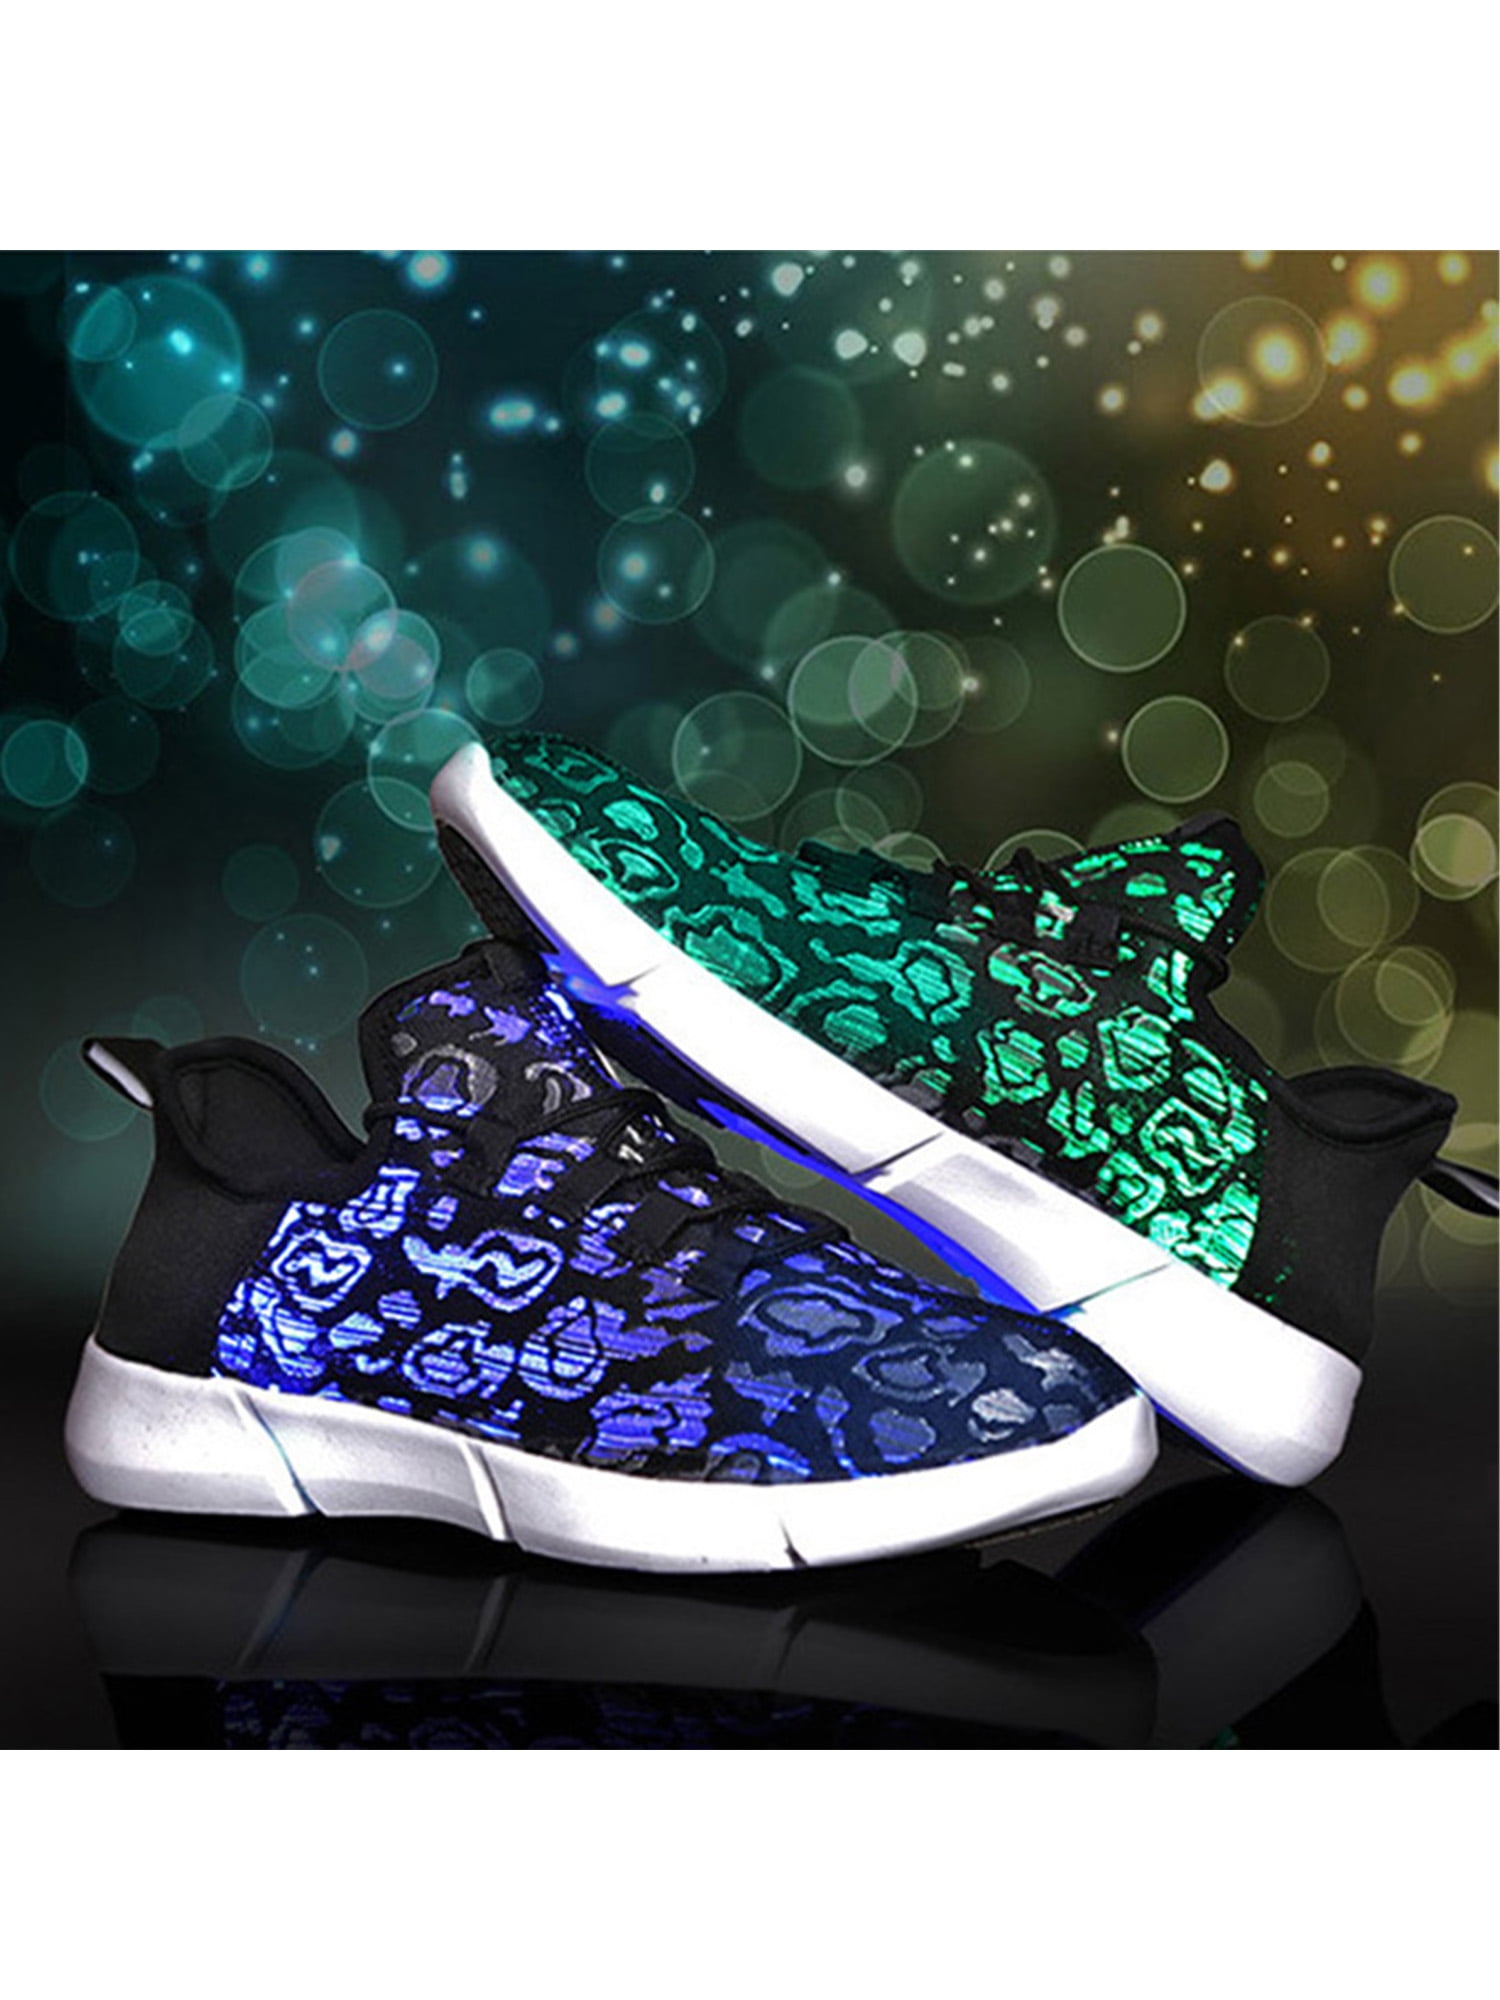 Details about   Kid Led Roller Shoes For Boy Girl Glowing Light Up USB Charging Luminous Sneaker 